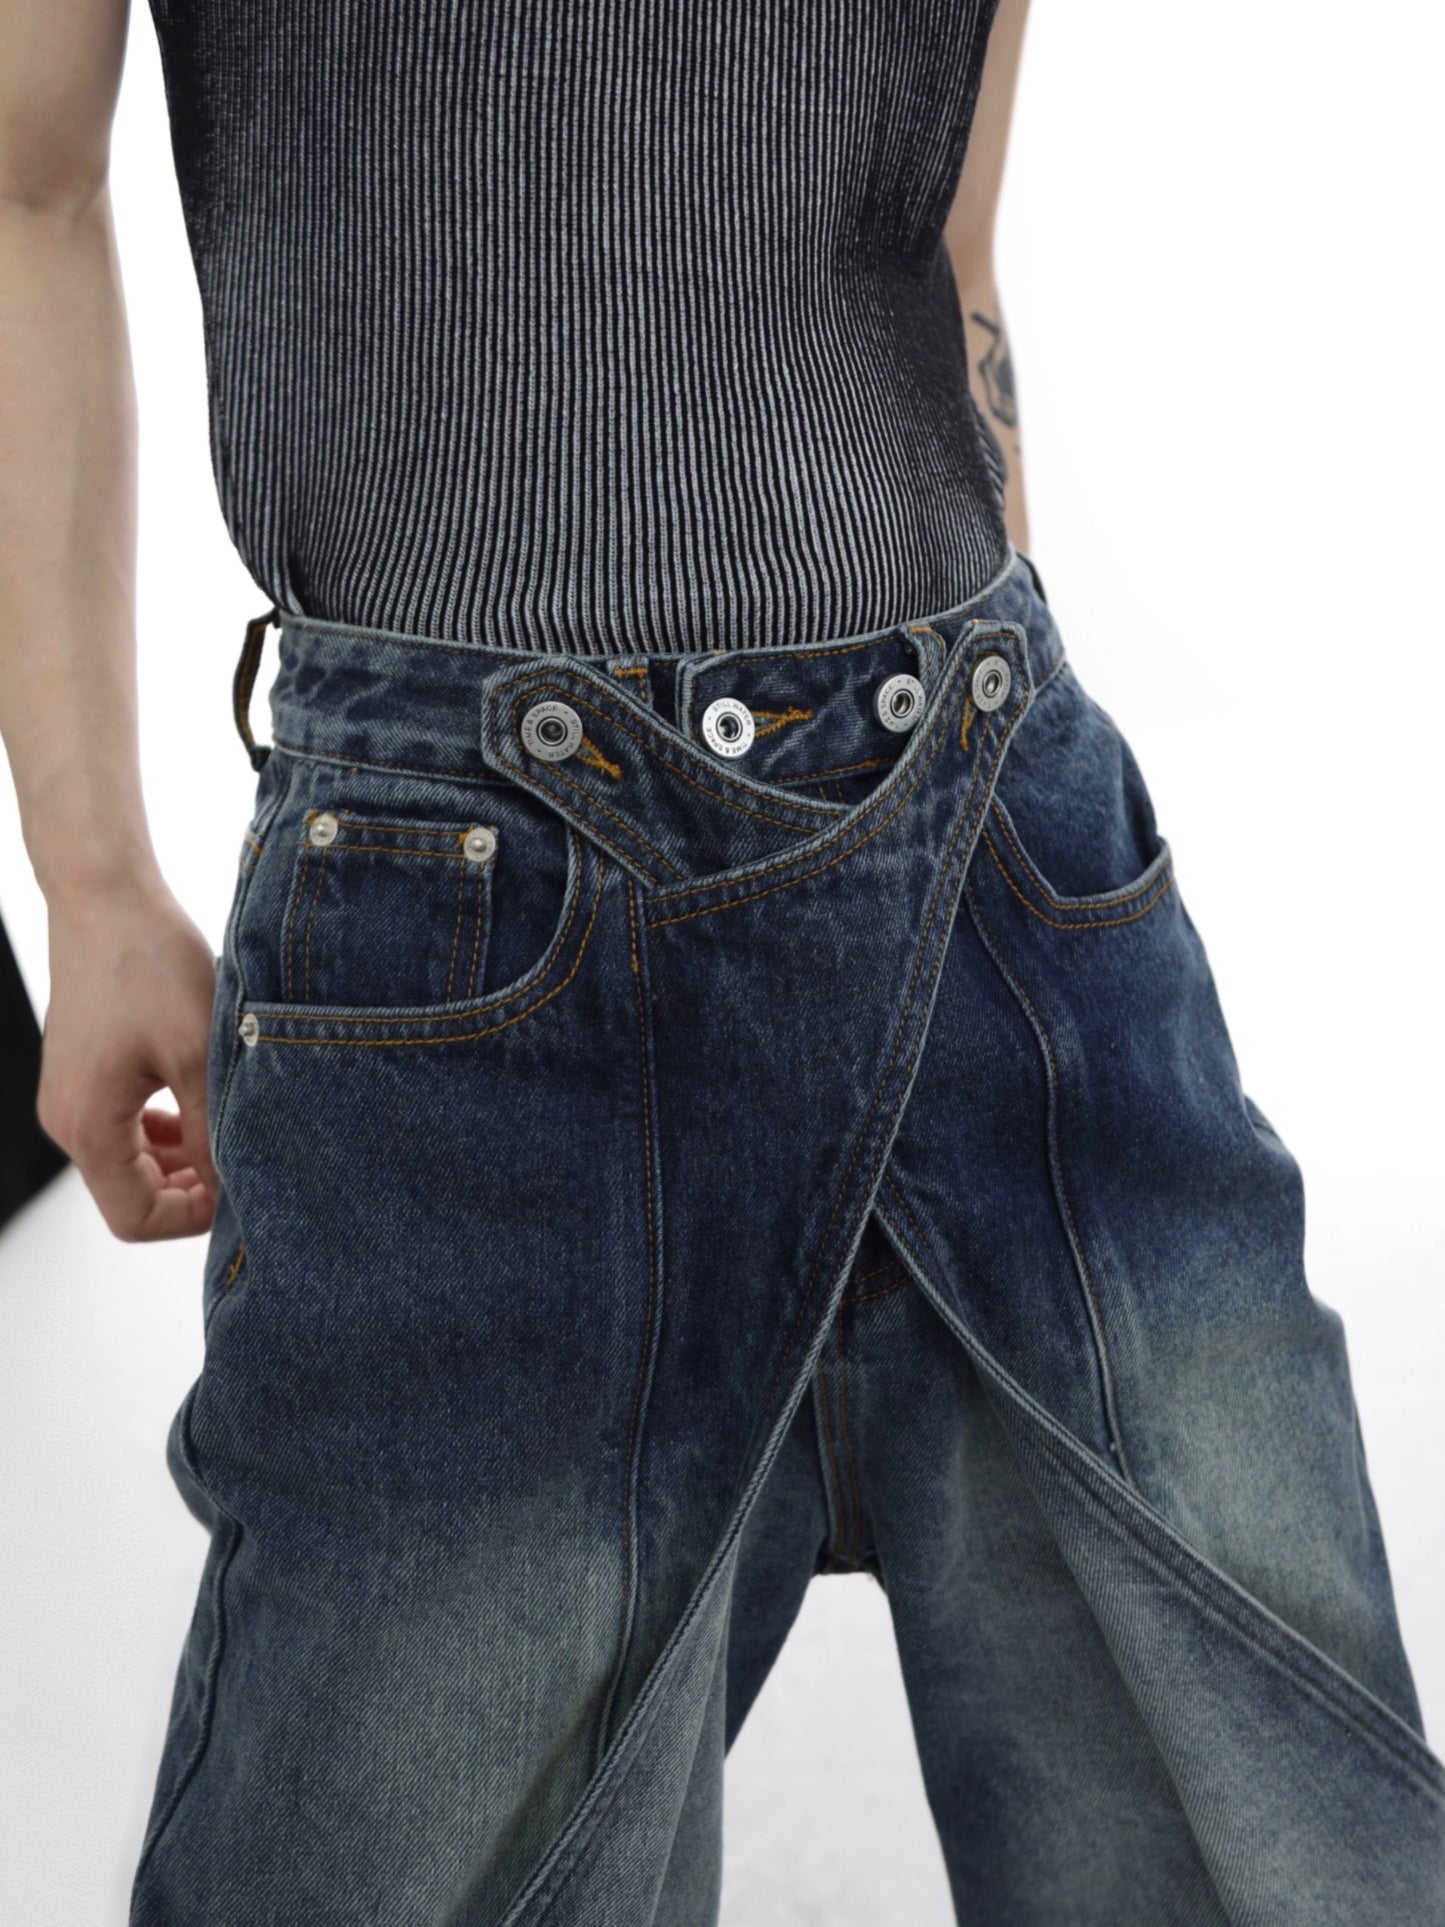 CulturE niche heavy work distressed washed jeans deconstruct the design sense of the cut-off flared pants wide-leg pants